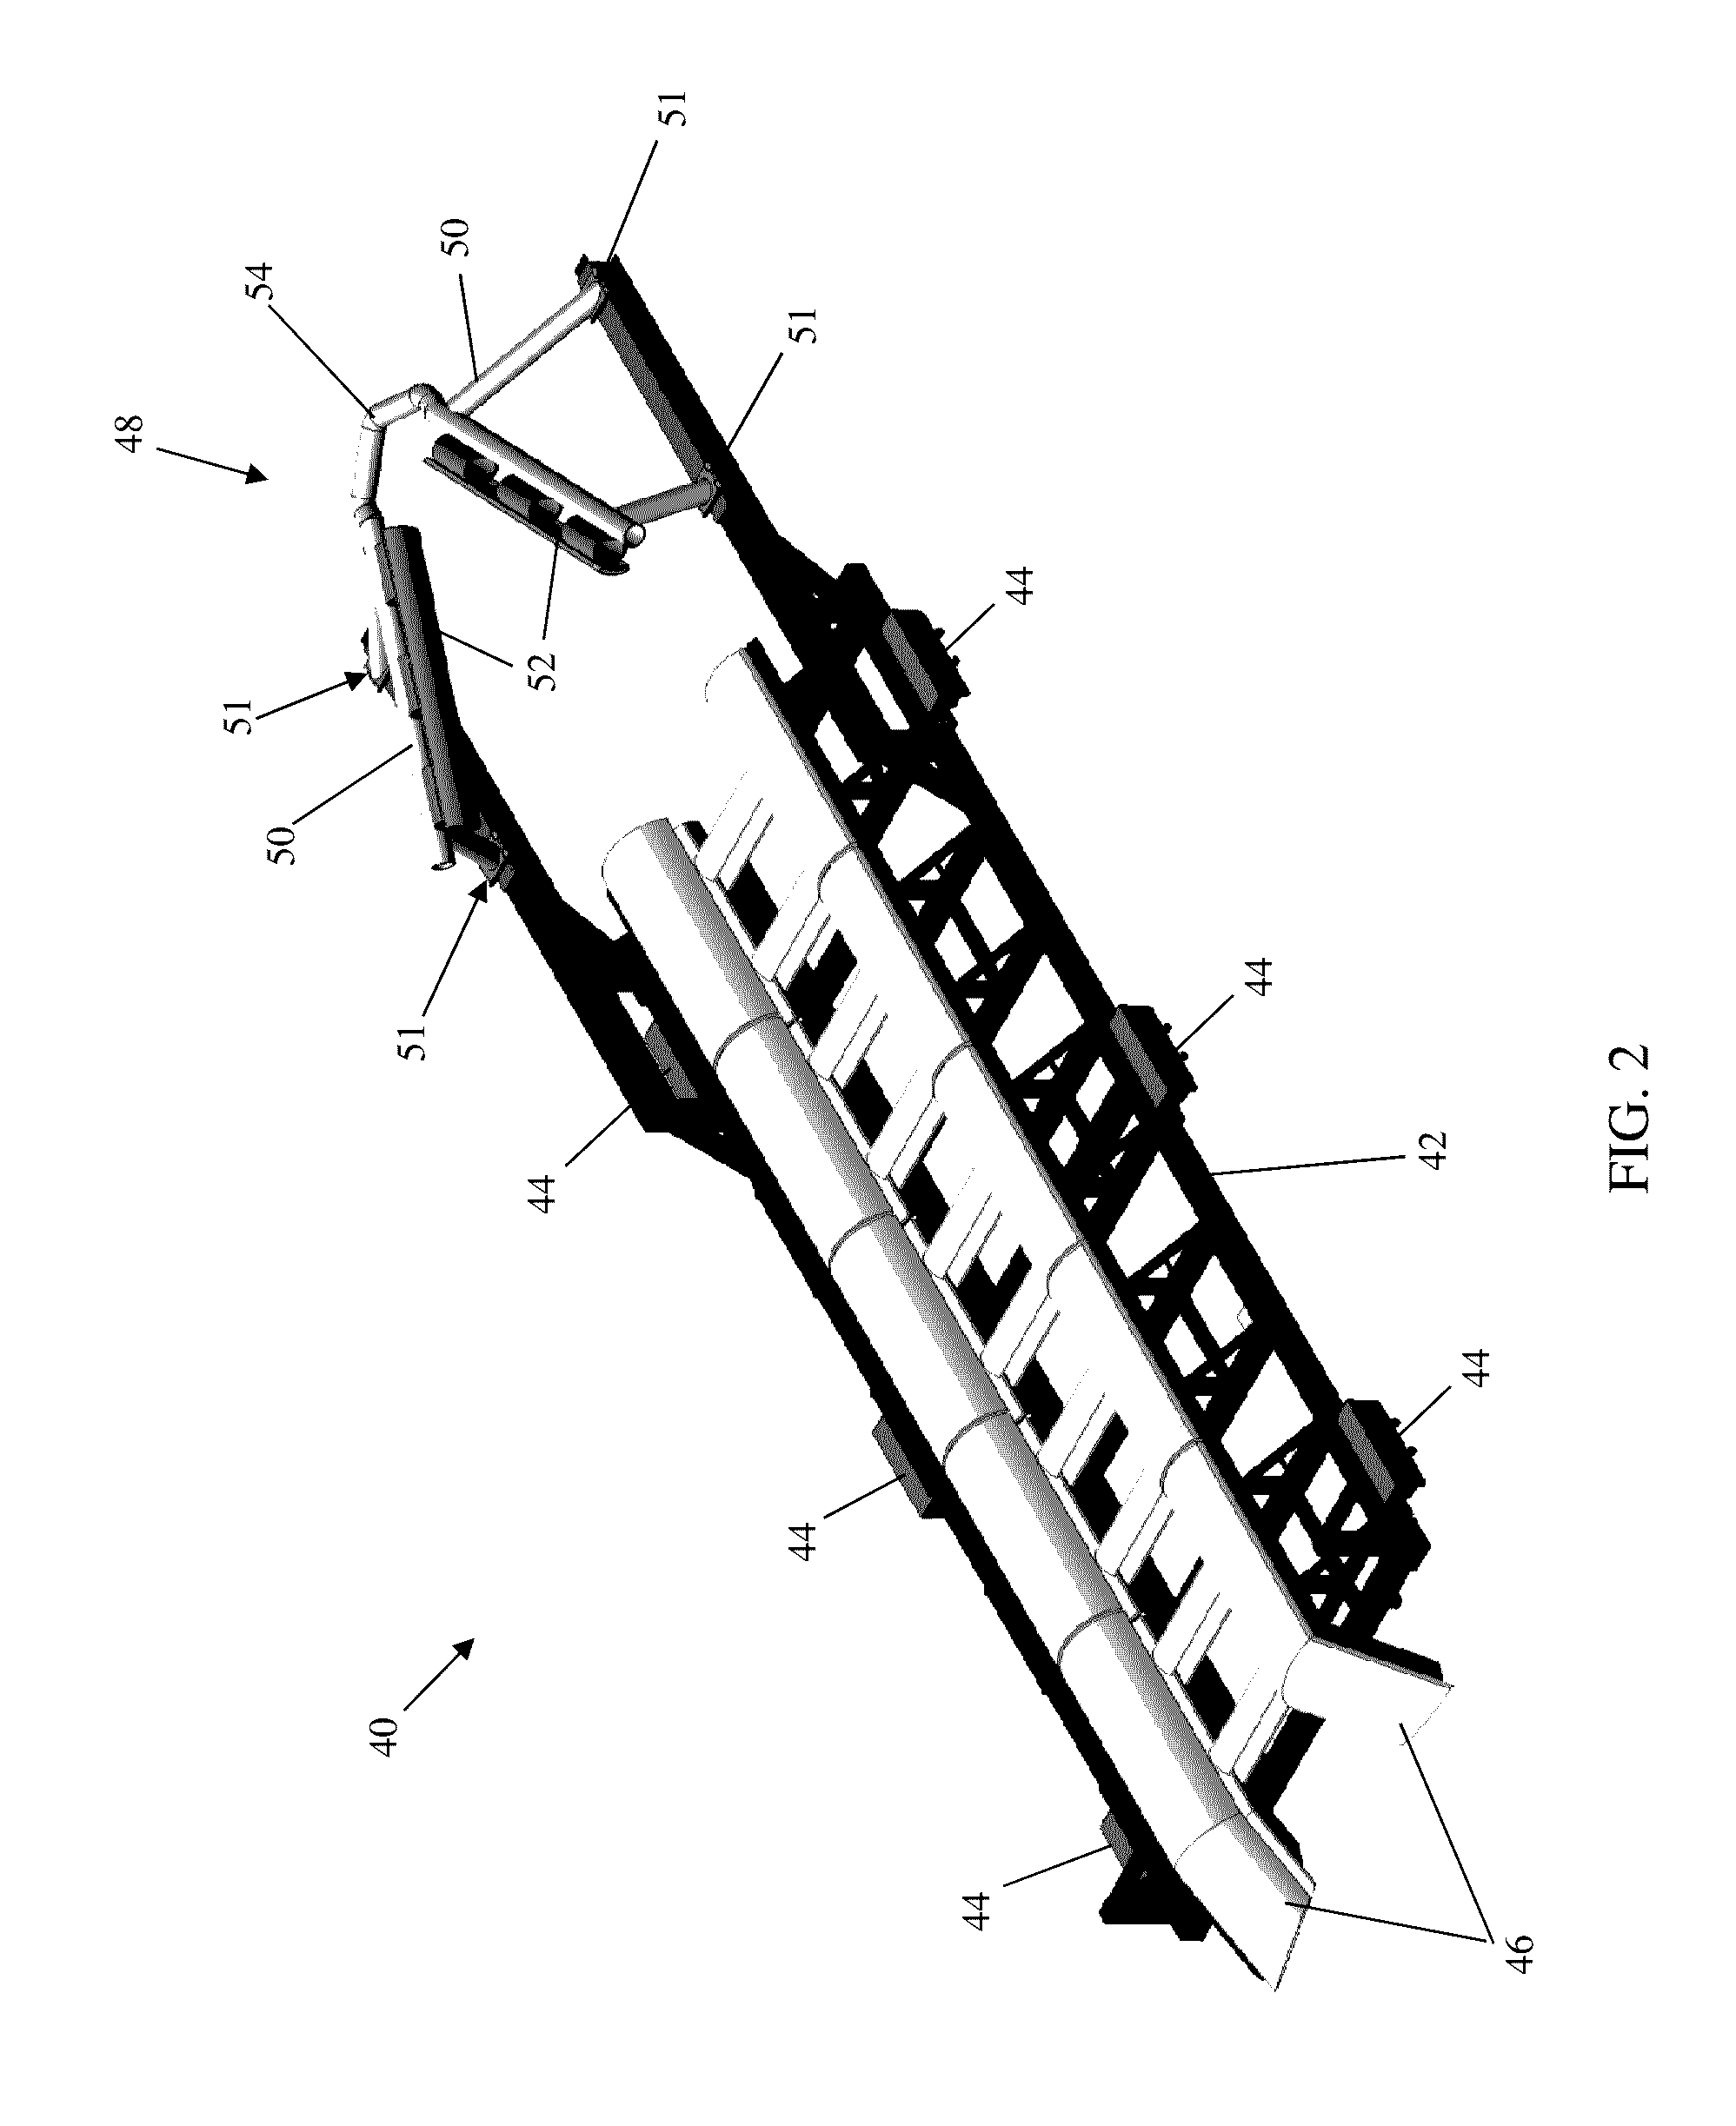 Ship-based waterborne vehicle launch, recovery, and handling system